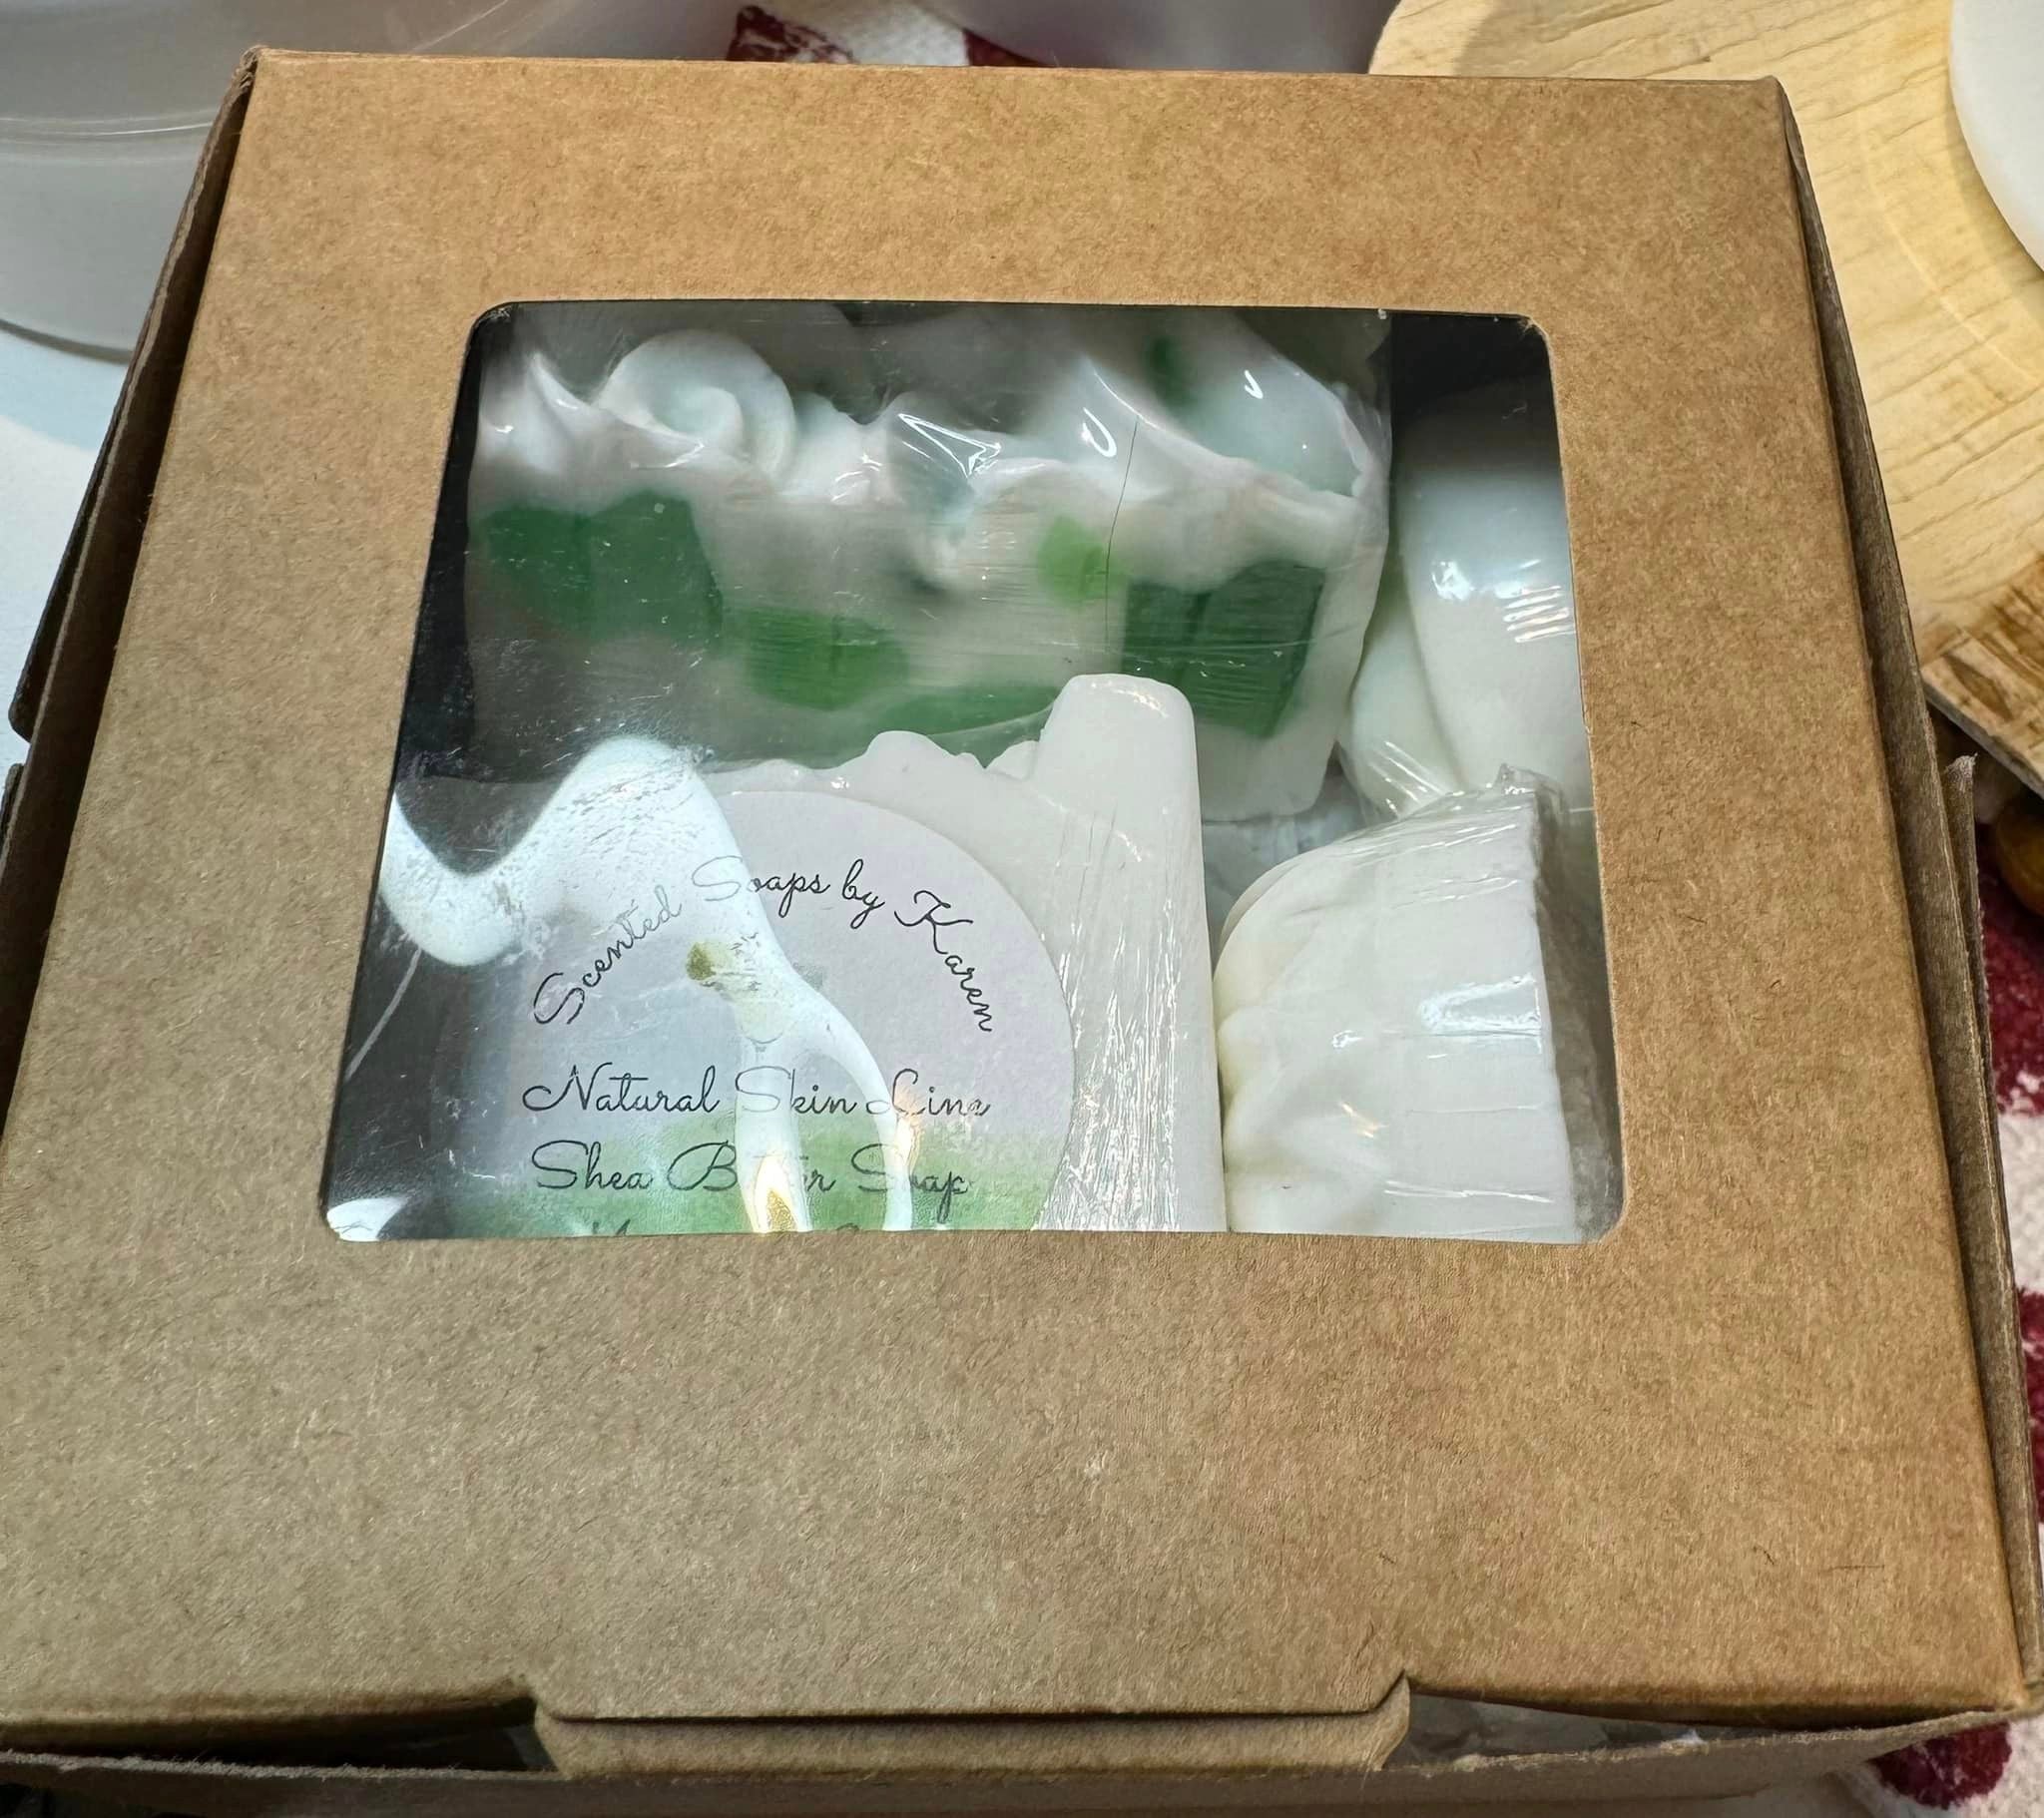 Margarita Lime whipped flowers on top of a beautiful white with green glycerin and shea butter soap. Large bar, medium bar and 2 rose guest size soaps.